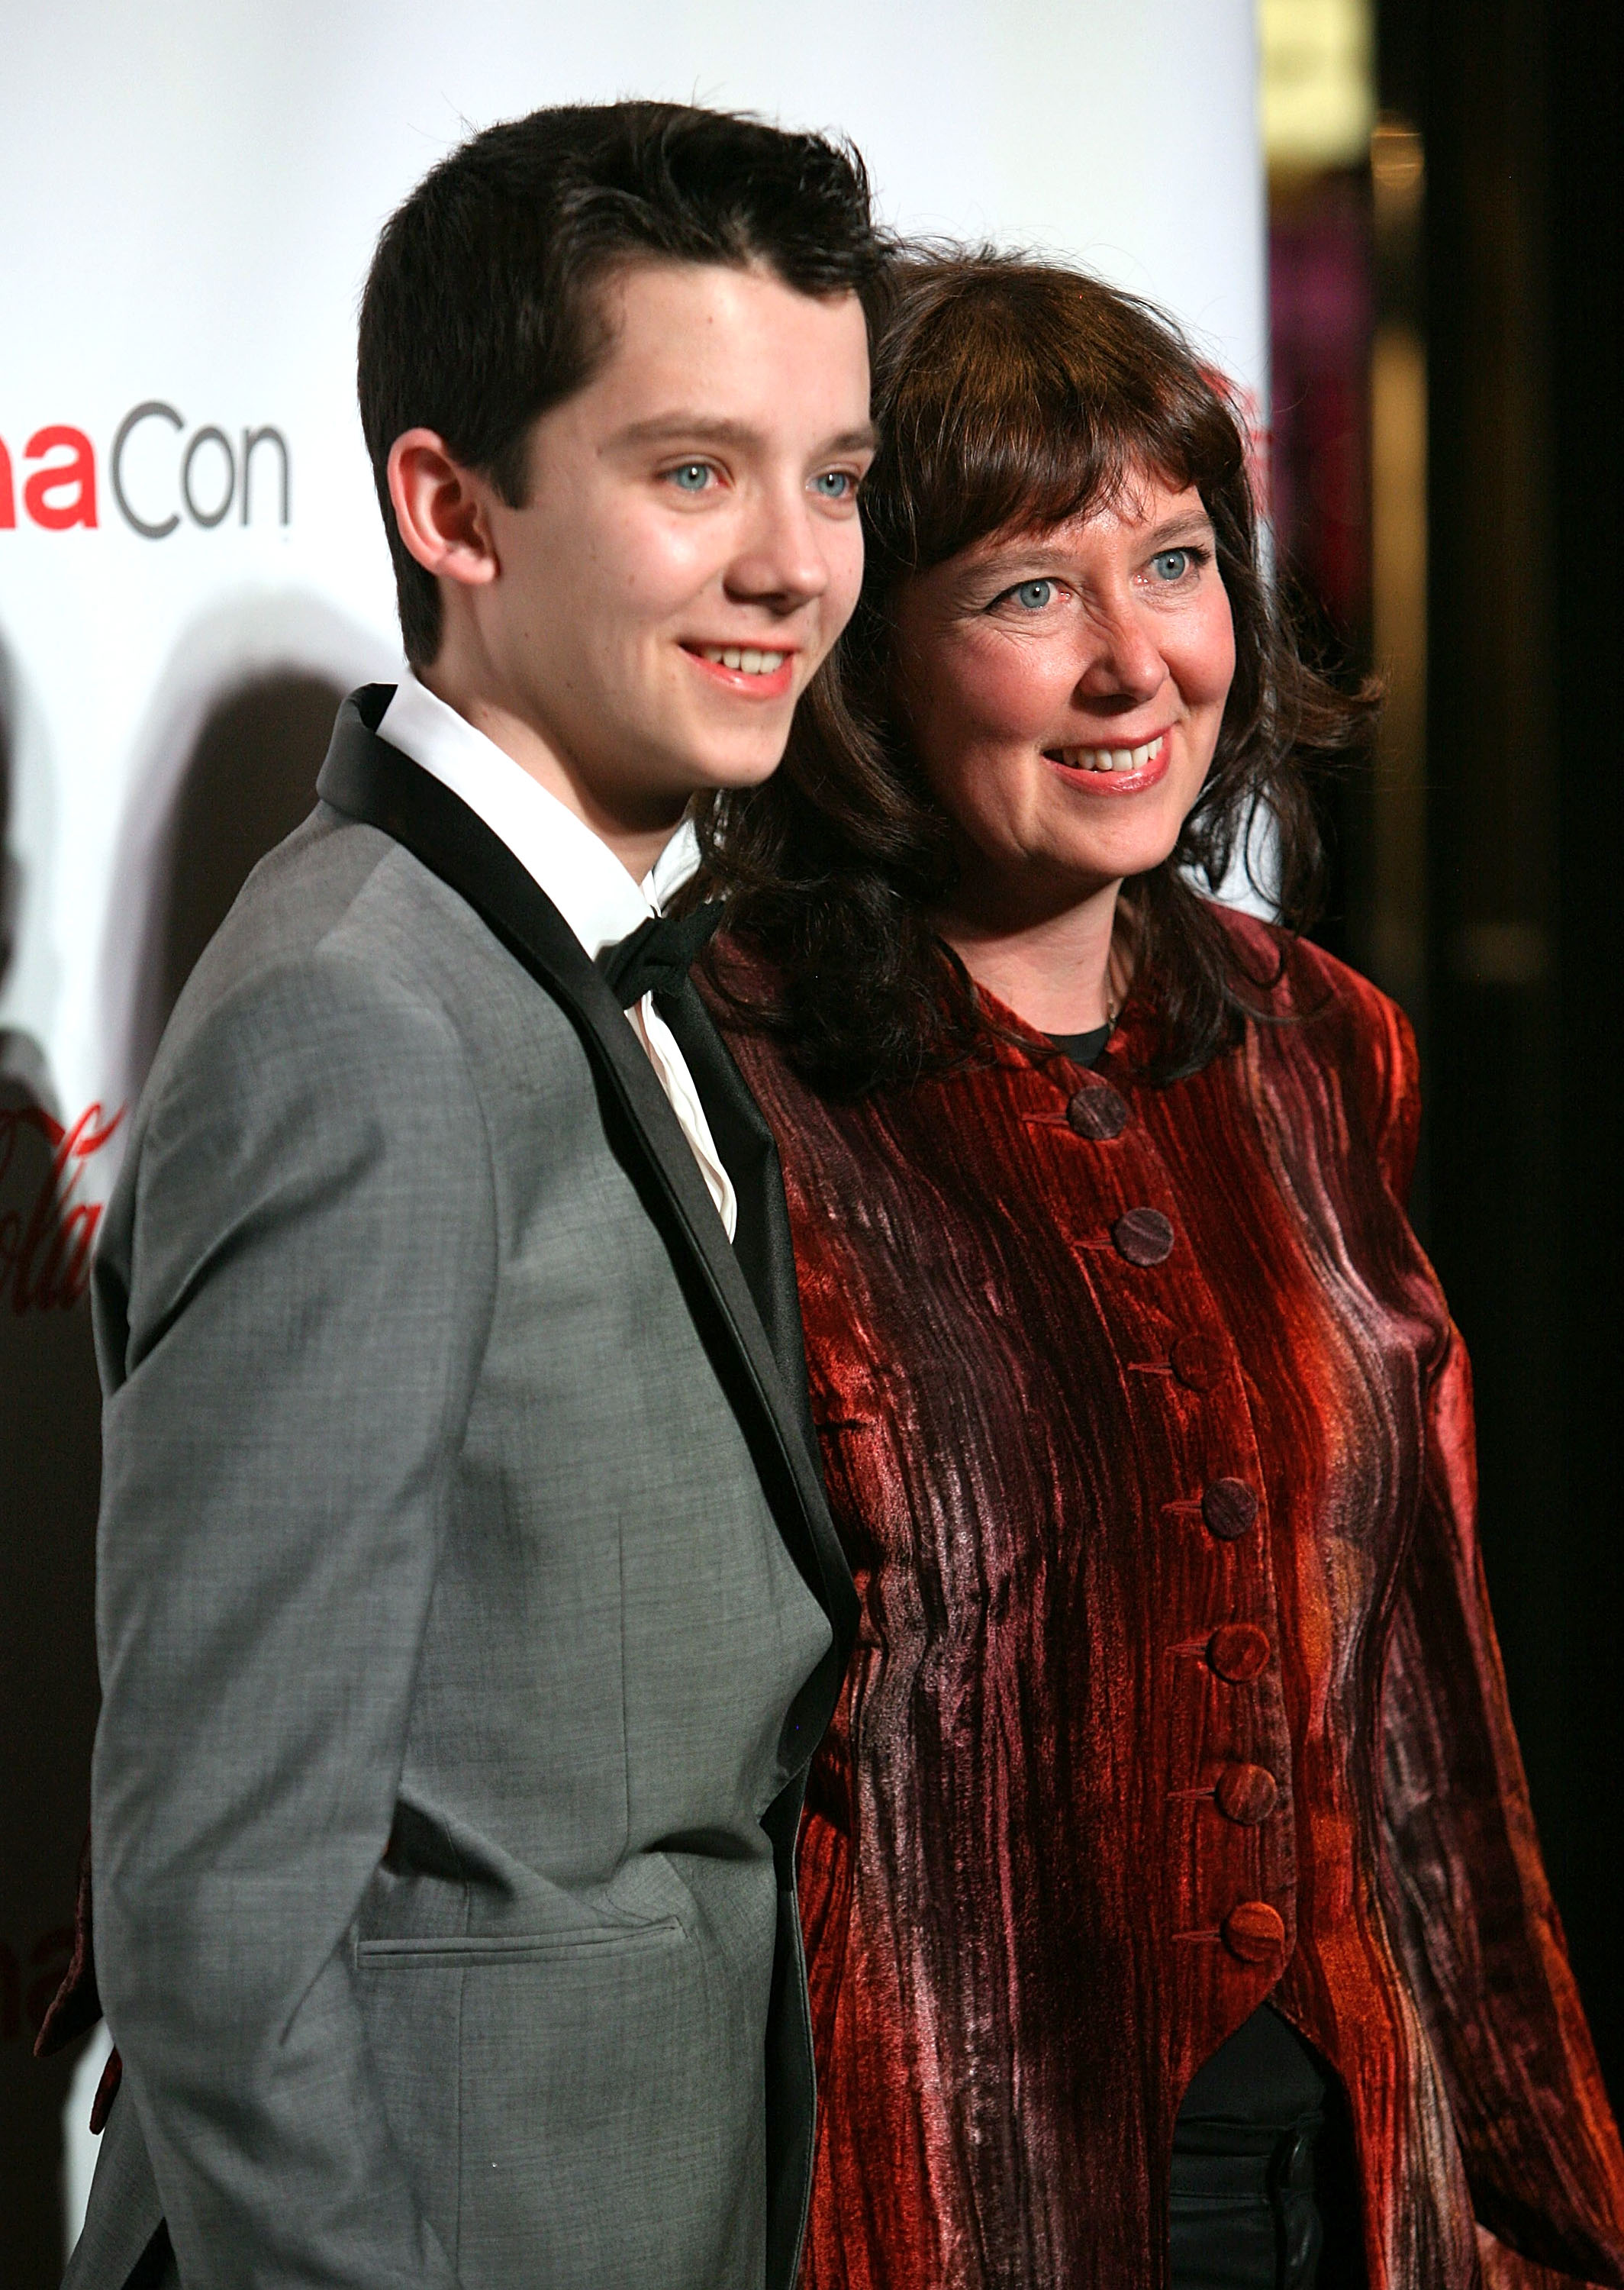 Asa Butterfield (L) and his mother, Jacqueline Farr, attend the CinemaCon 2013 Final Night Awards at Caesars Palace during CinemaCon on April 18, 2013, in Las Vegas, Nevada. | Source: Getty Images